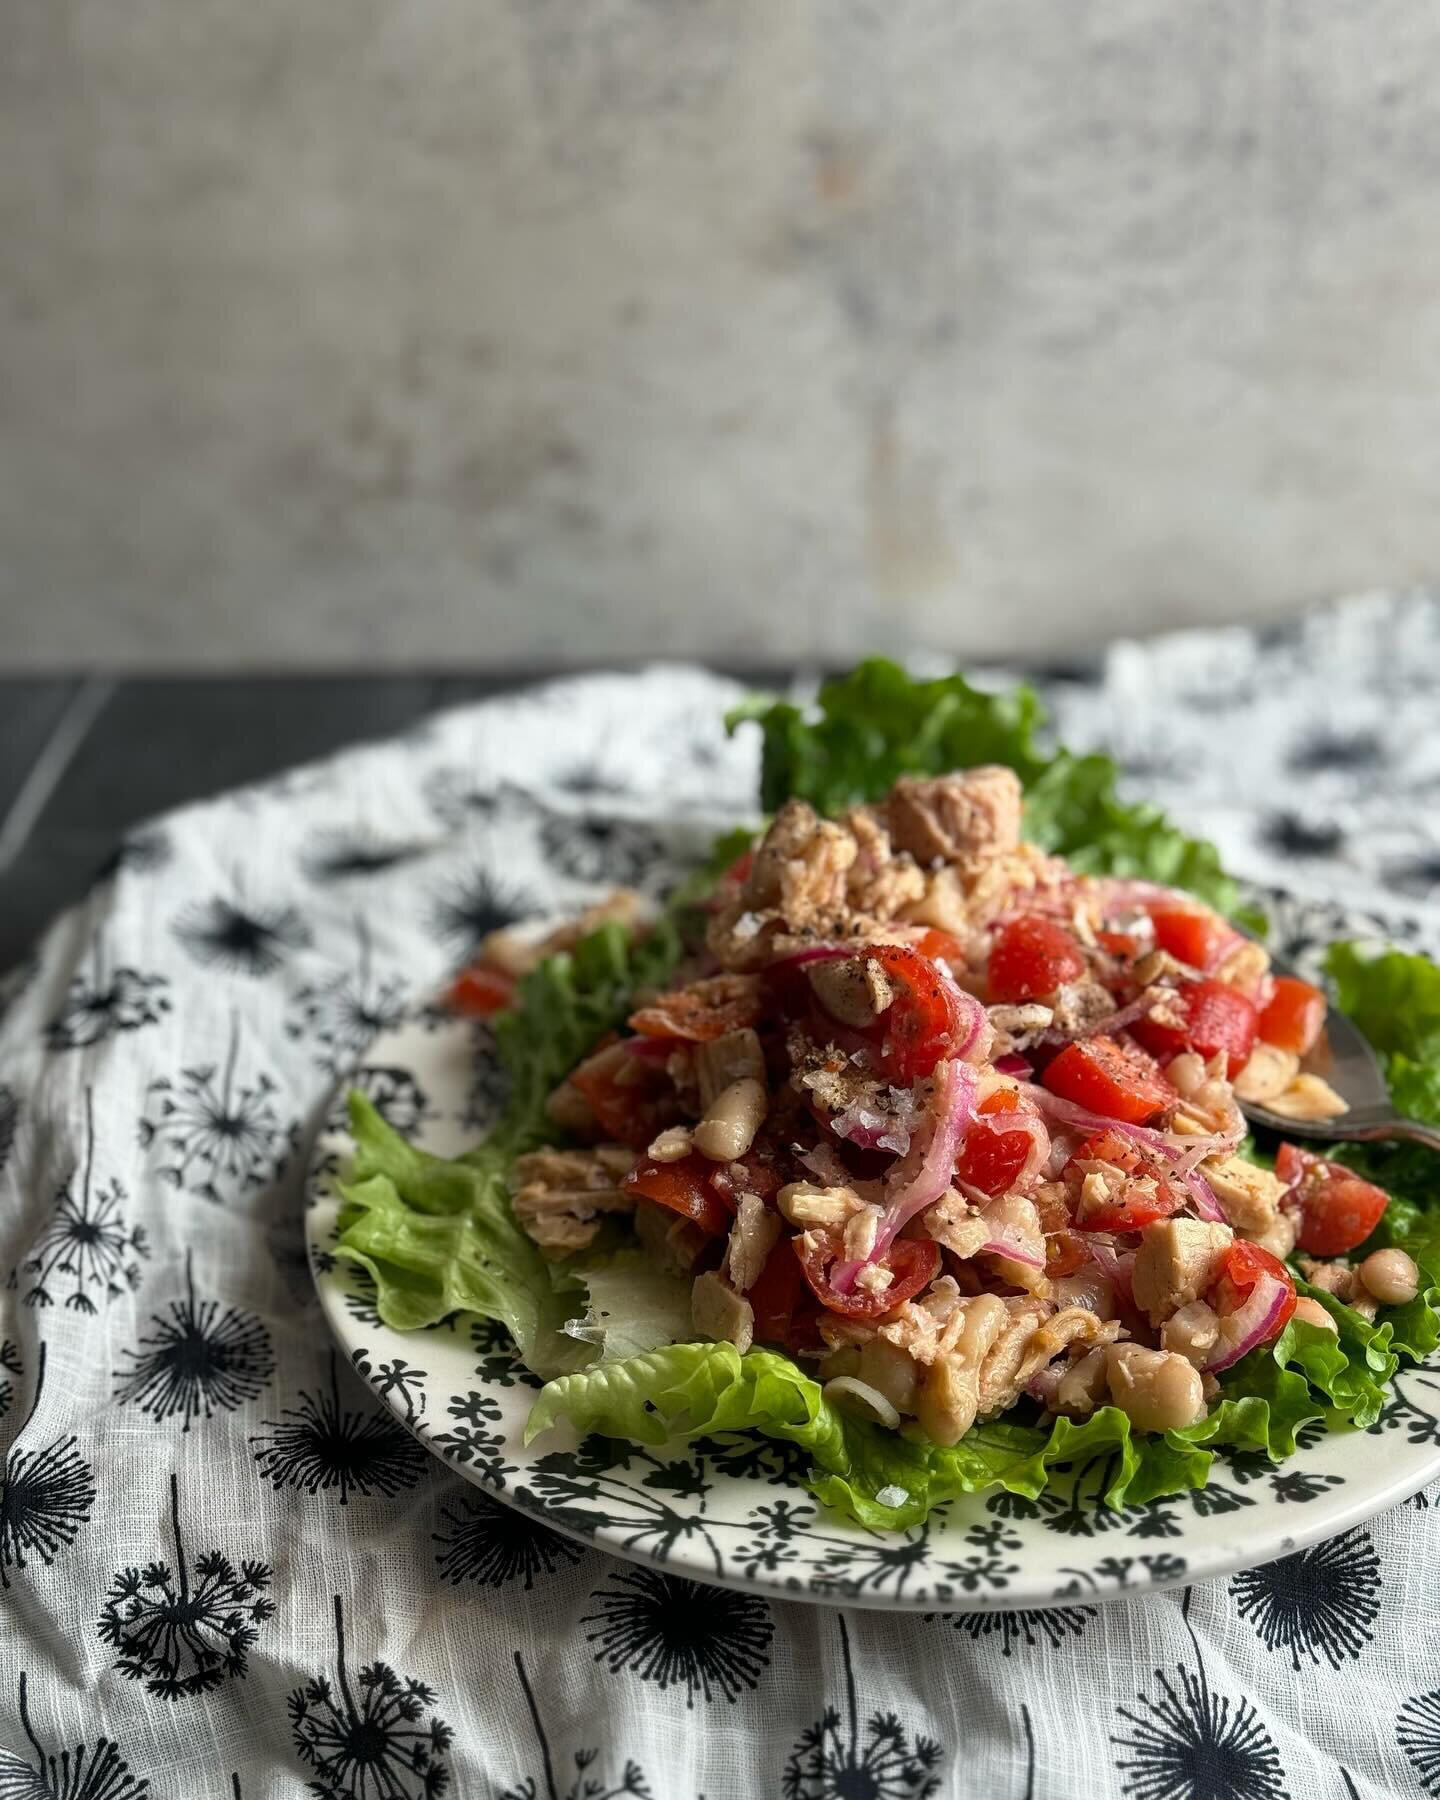 Tuna and Bean Salad - Recipe from Cucina Povera:The Italian Way of Transforming Humble Ingredients into Unforgettable Meals. Is the February cookbook for RainydayBites Cookbook Club. Our challenge was to make a recipe from the Beans and Lentil chapte